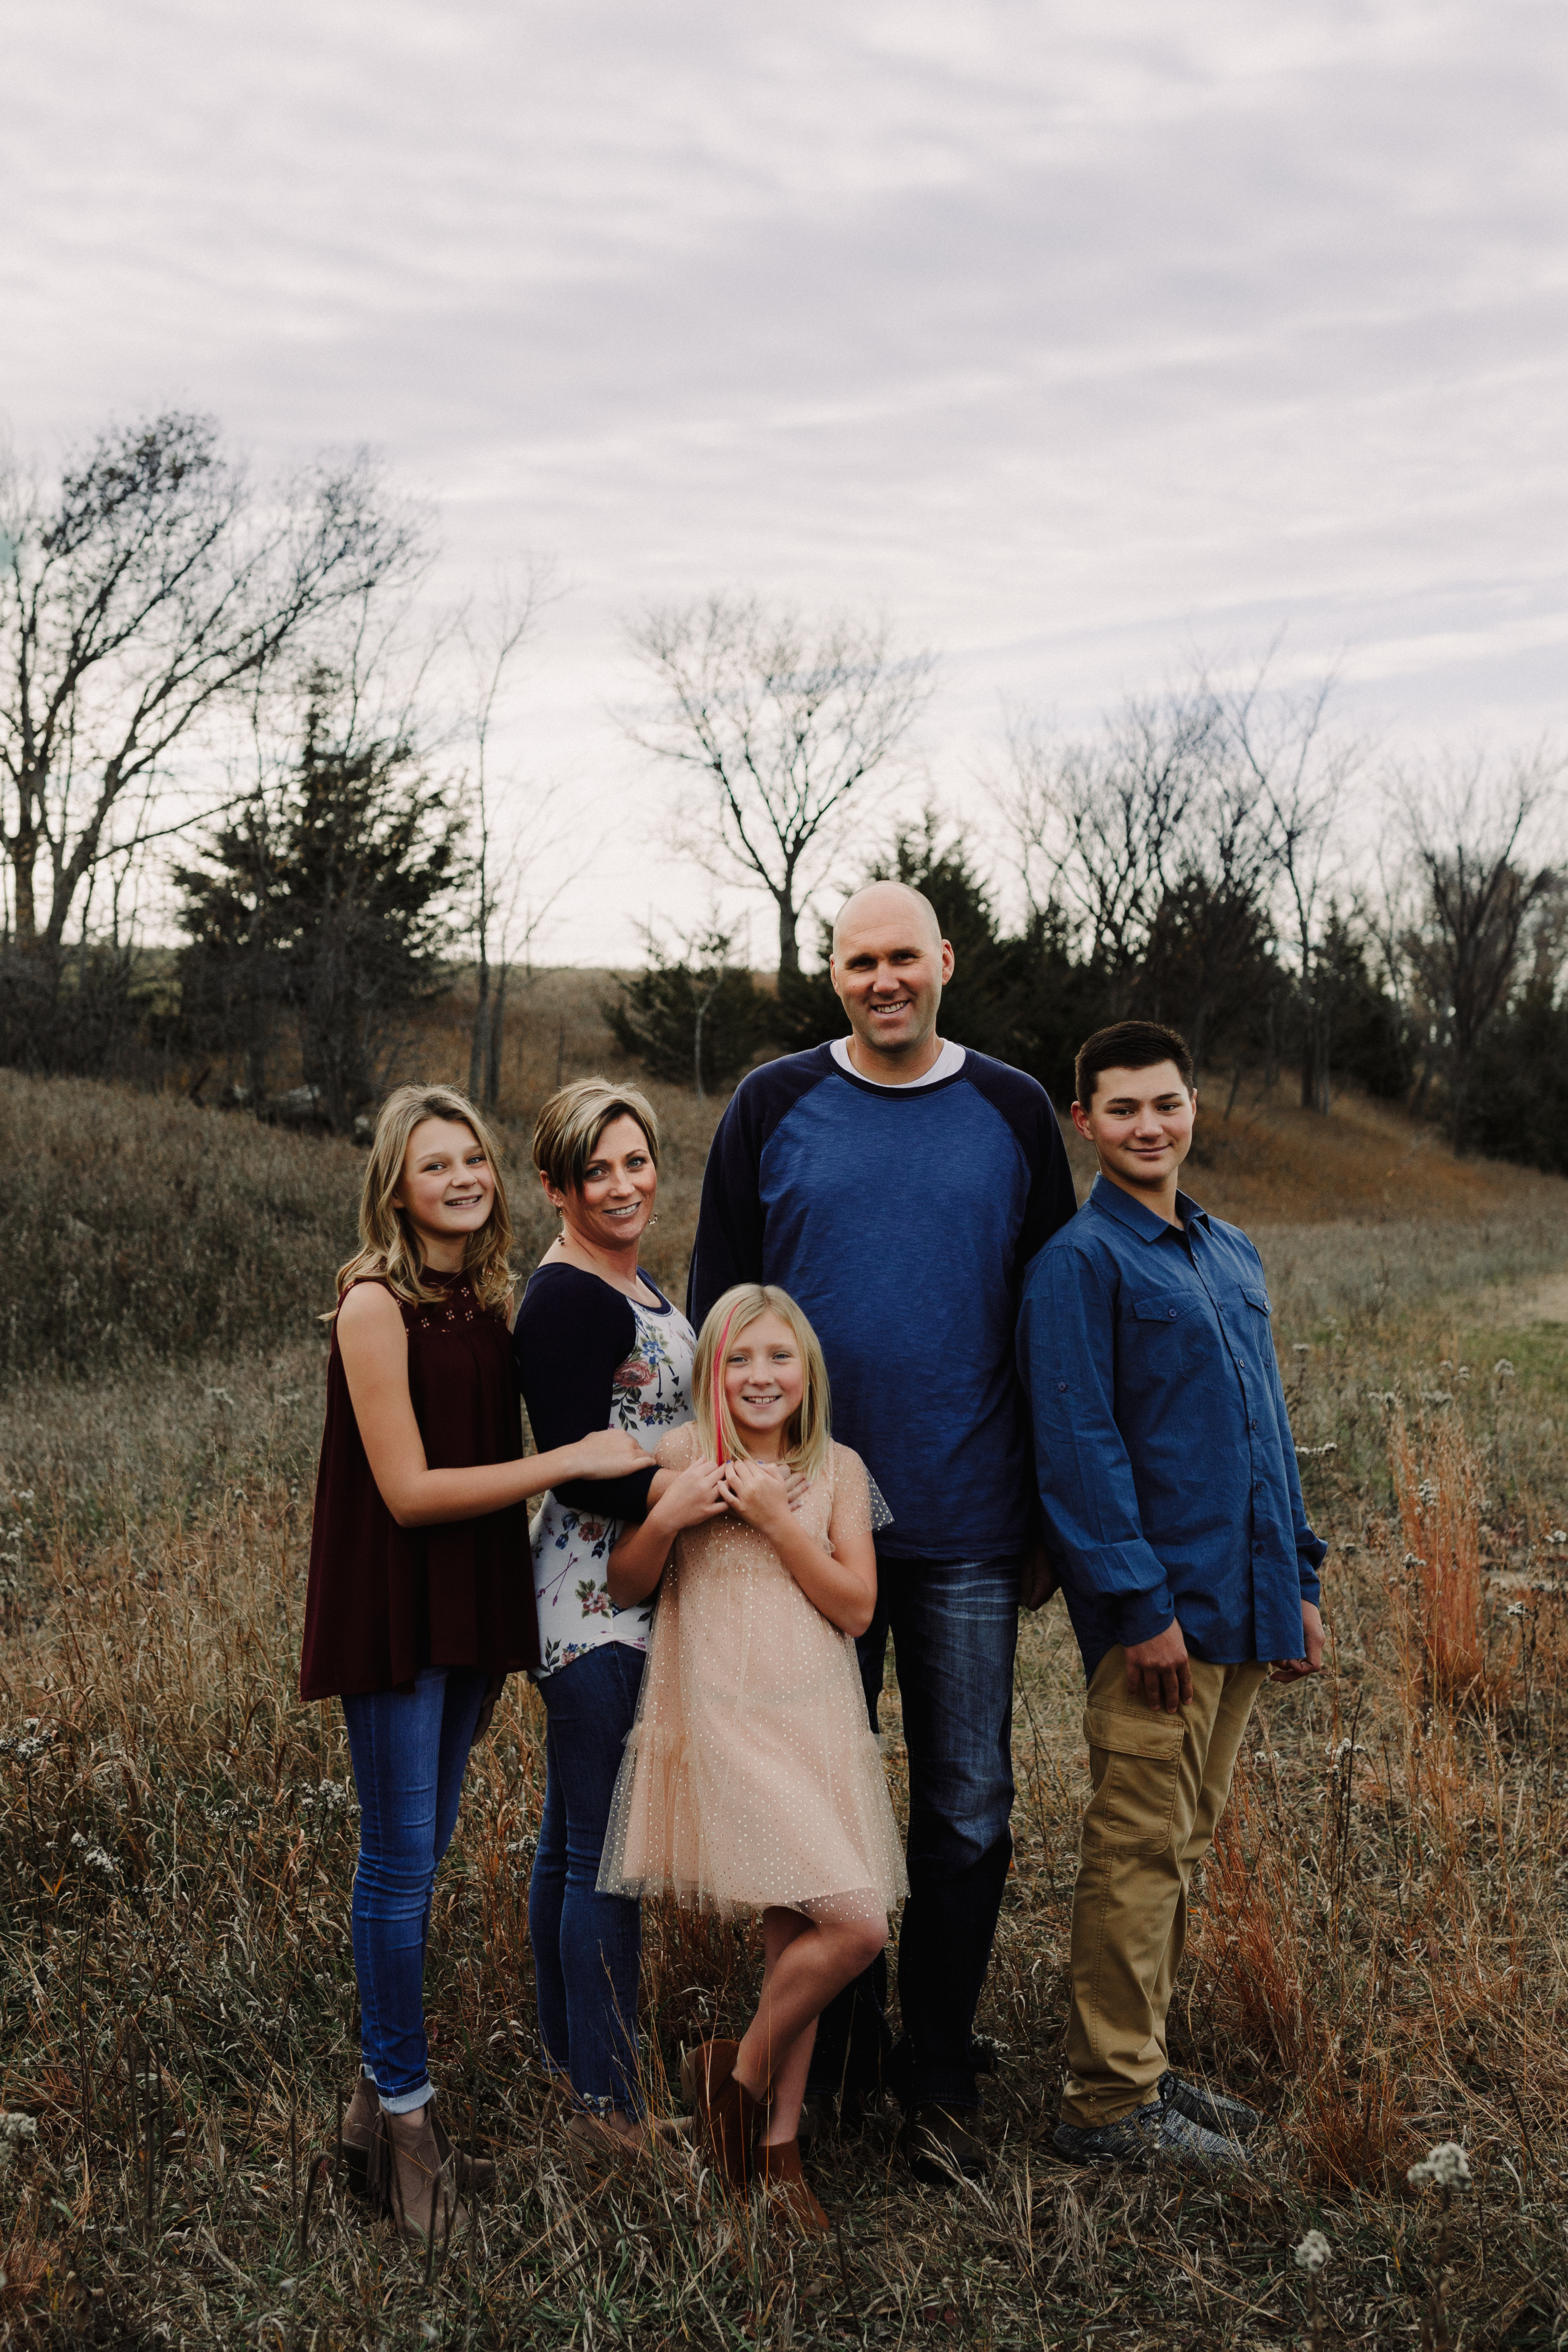 Hohn family: "When you own your business, the work never ends"